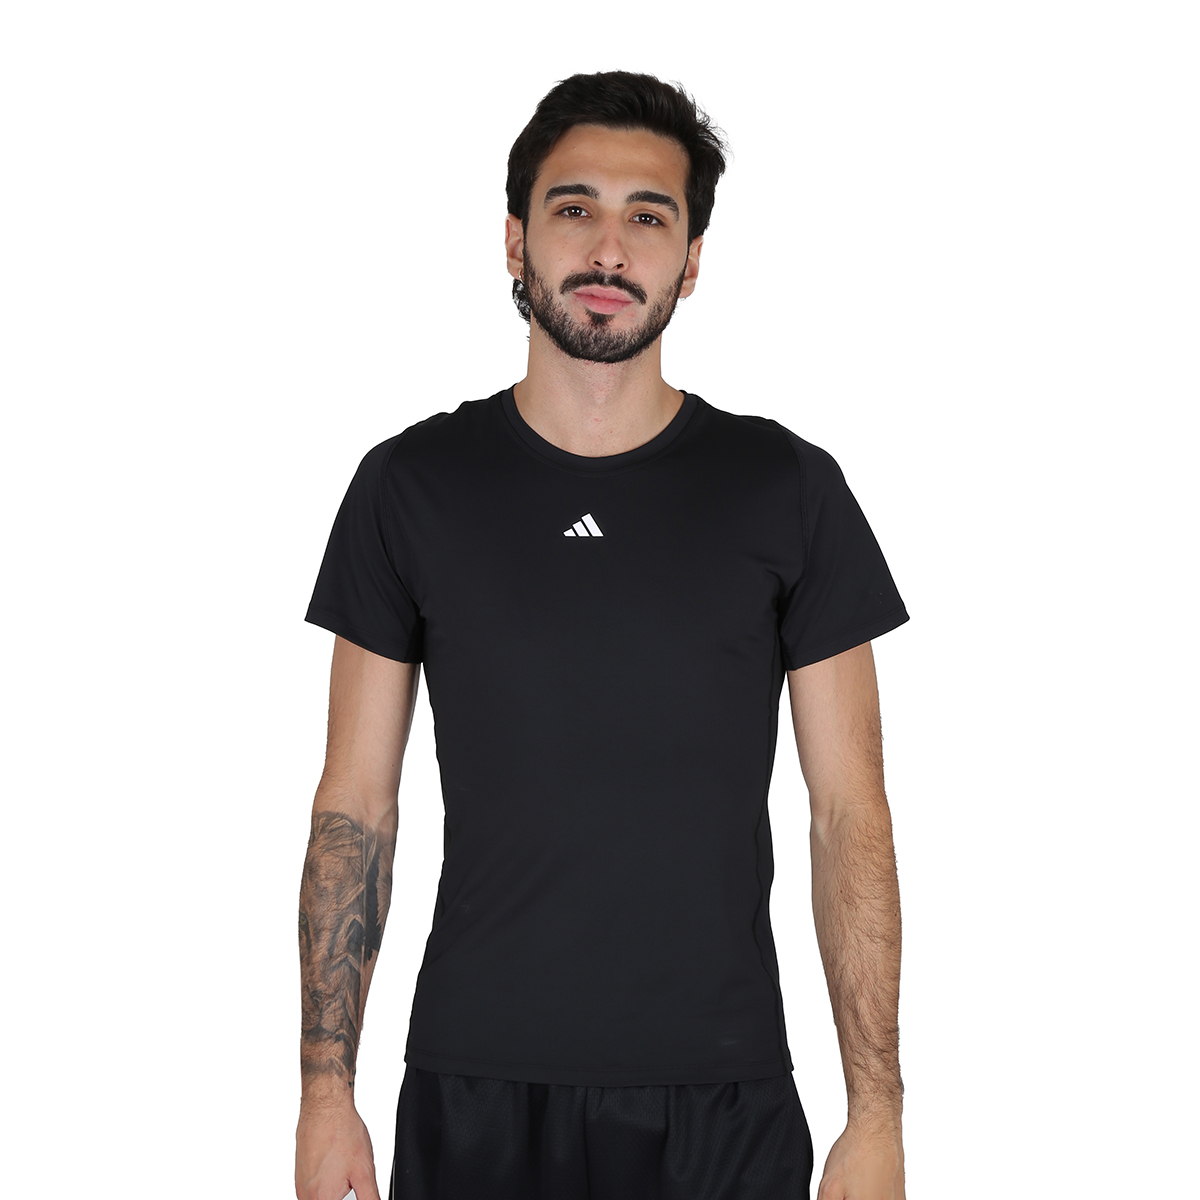 Remera Entrenamiento adidas Techfit Hombre,  image number null